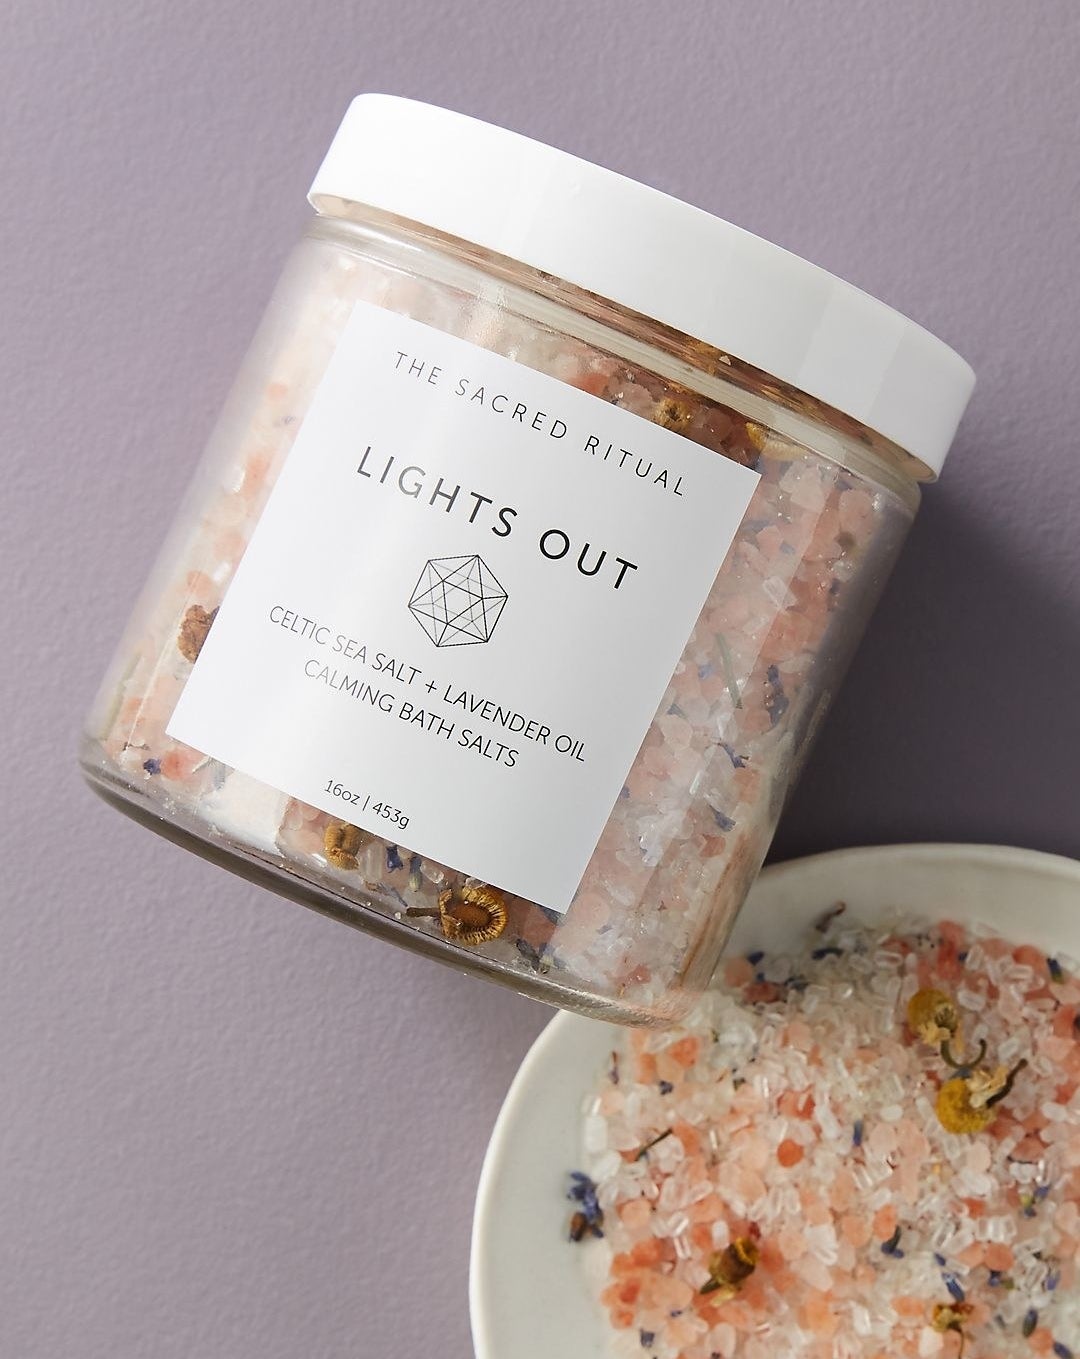 jar of the sacred ritual lights out bath salts, next to a dish of pink and white salts